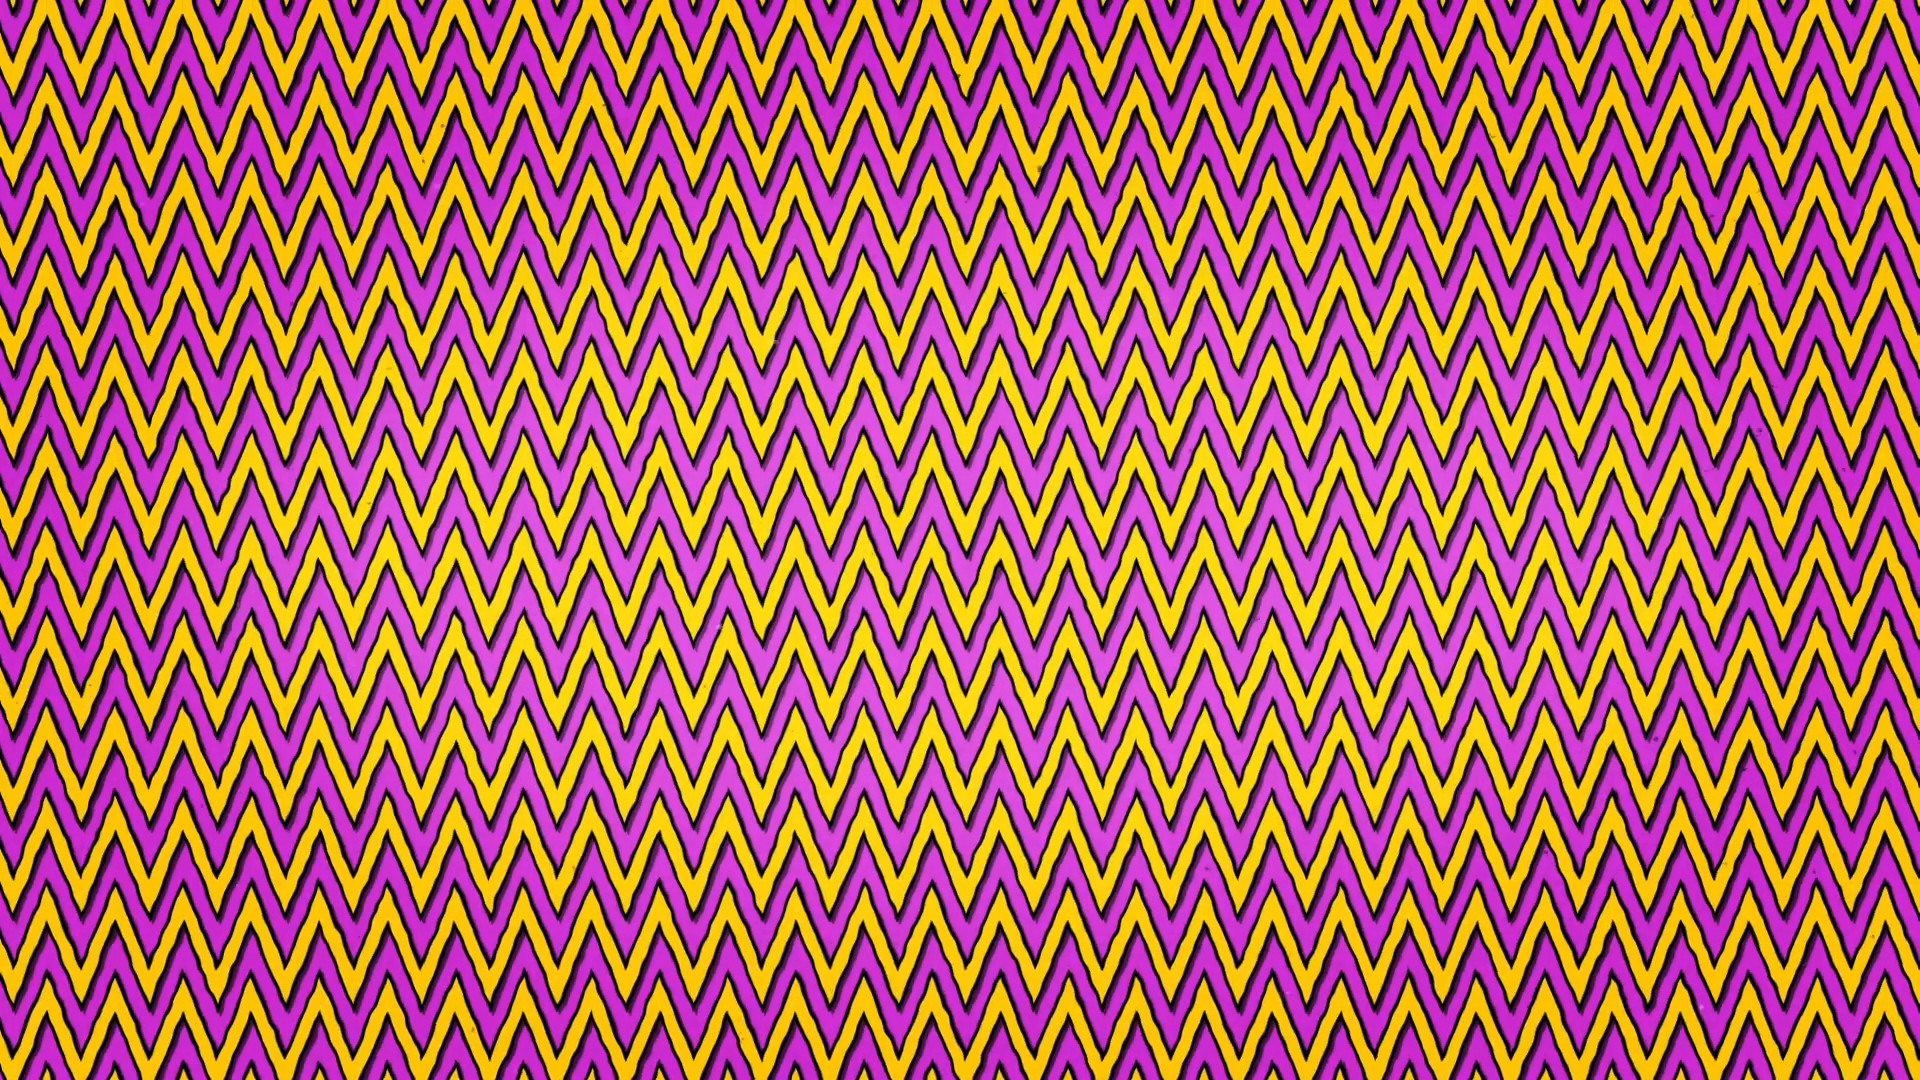 1920x1080 Yellow Stripes ZigZag Pink Clean Background Animation Seamless Looped  Texture